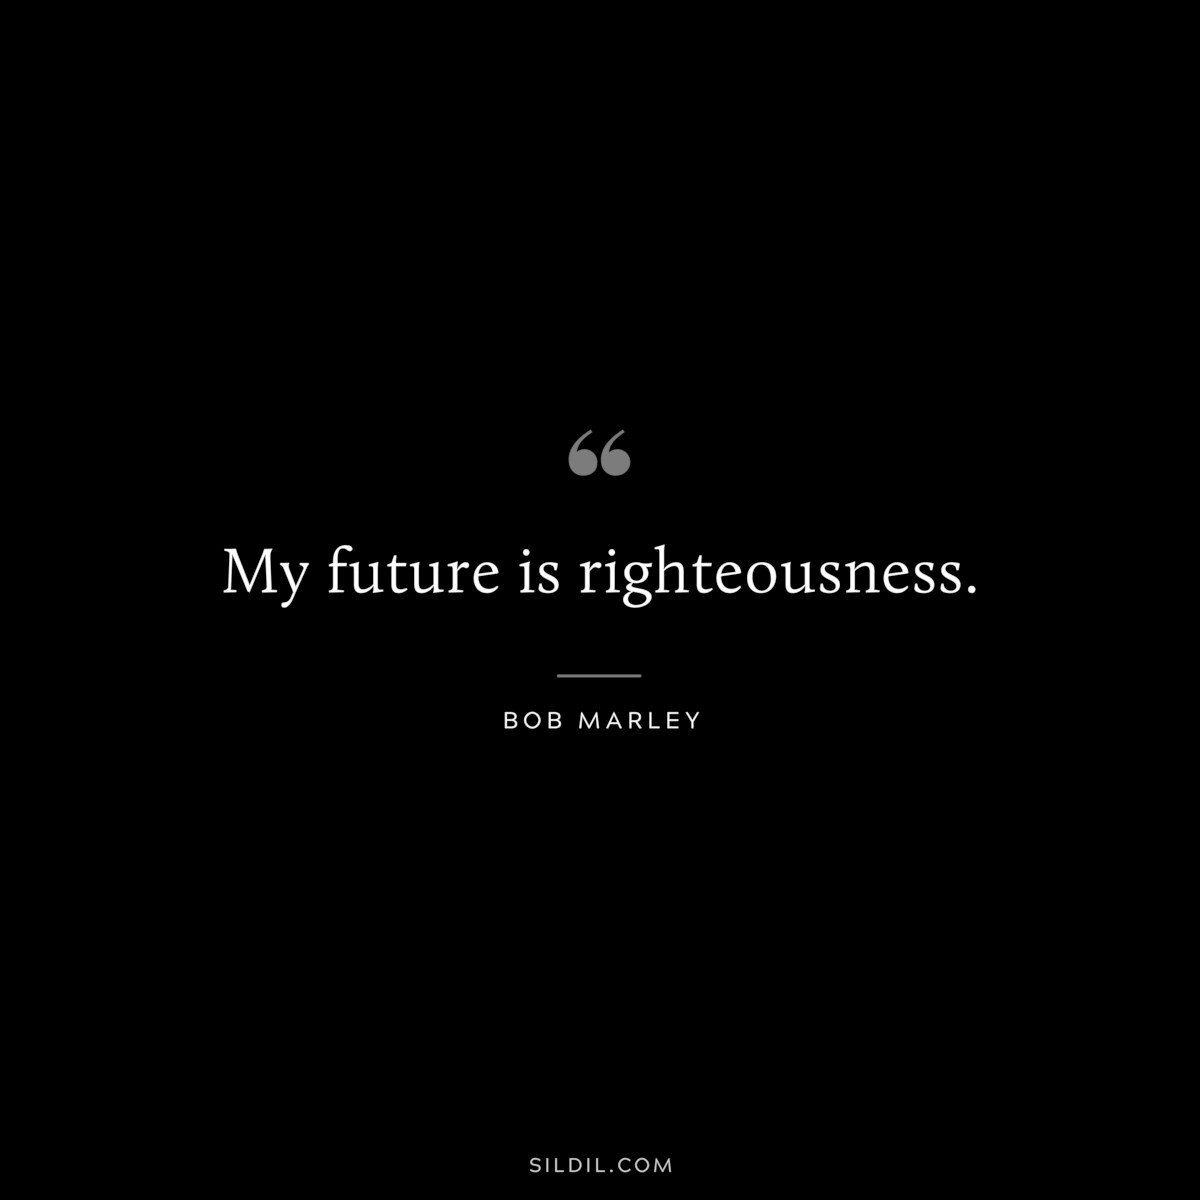 My future is righteousness. ― Bob Marley